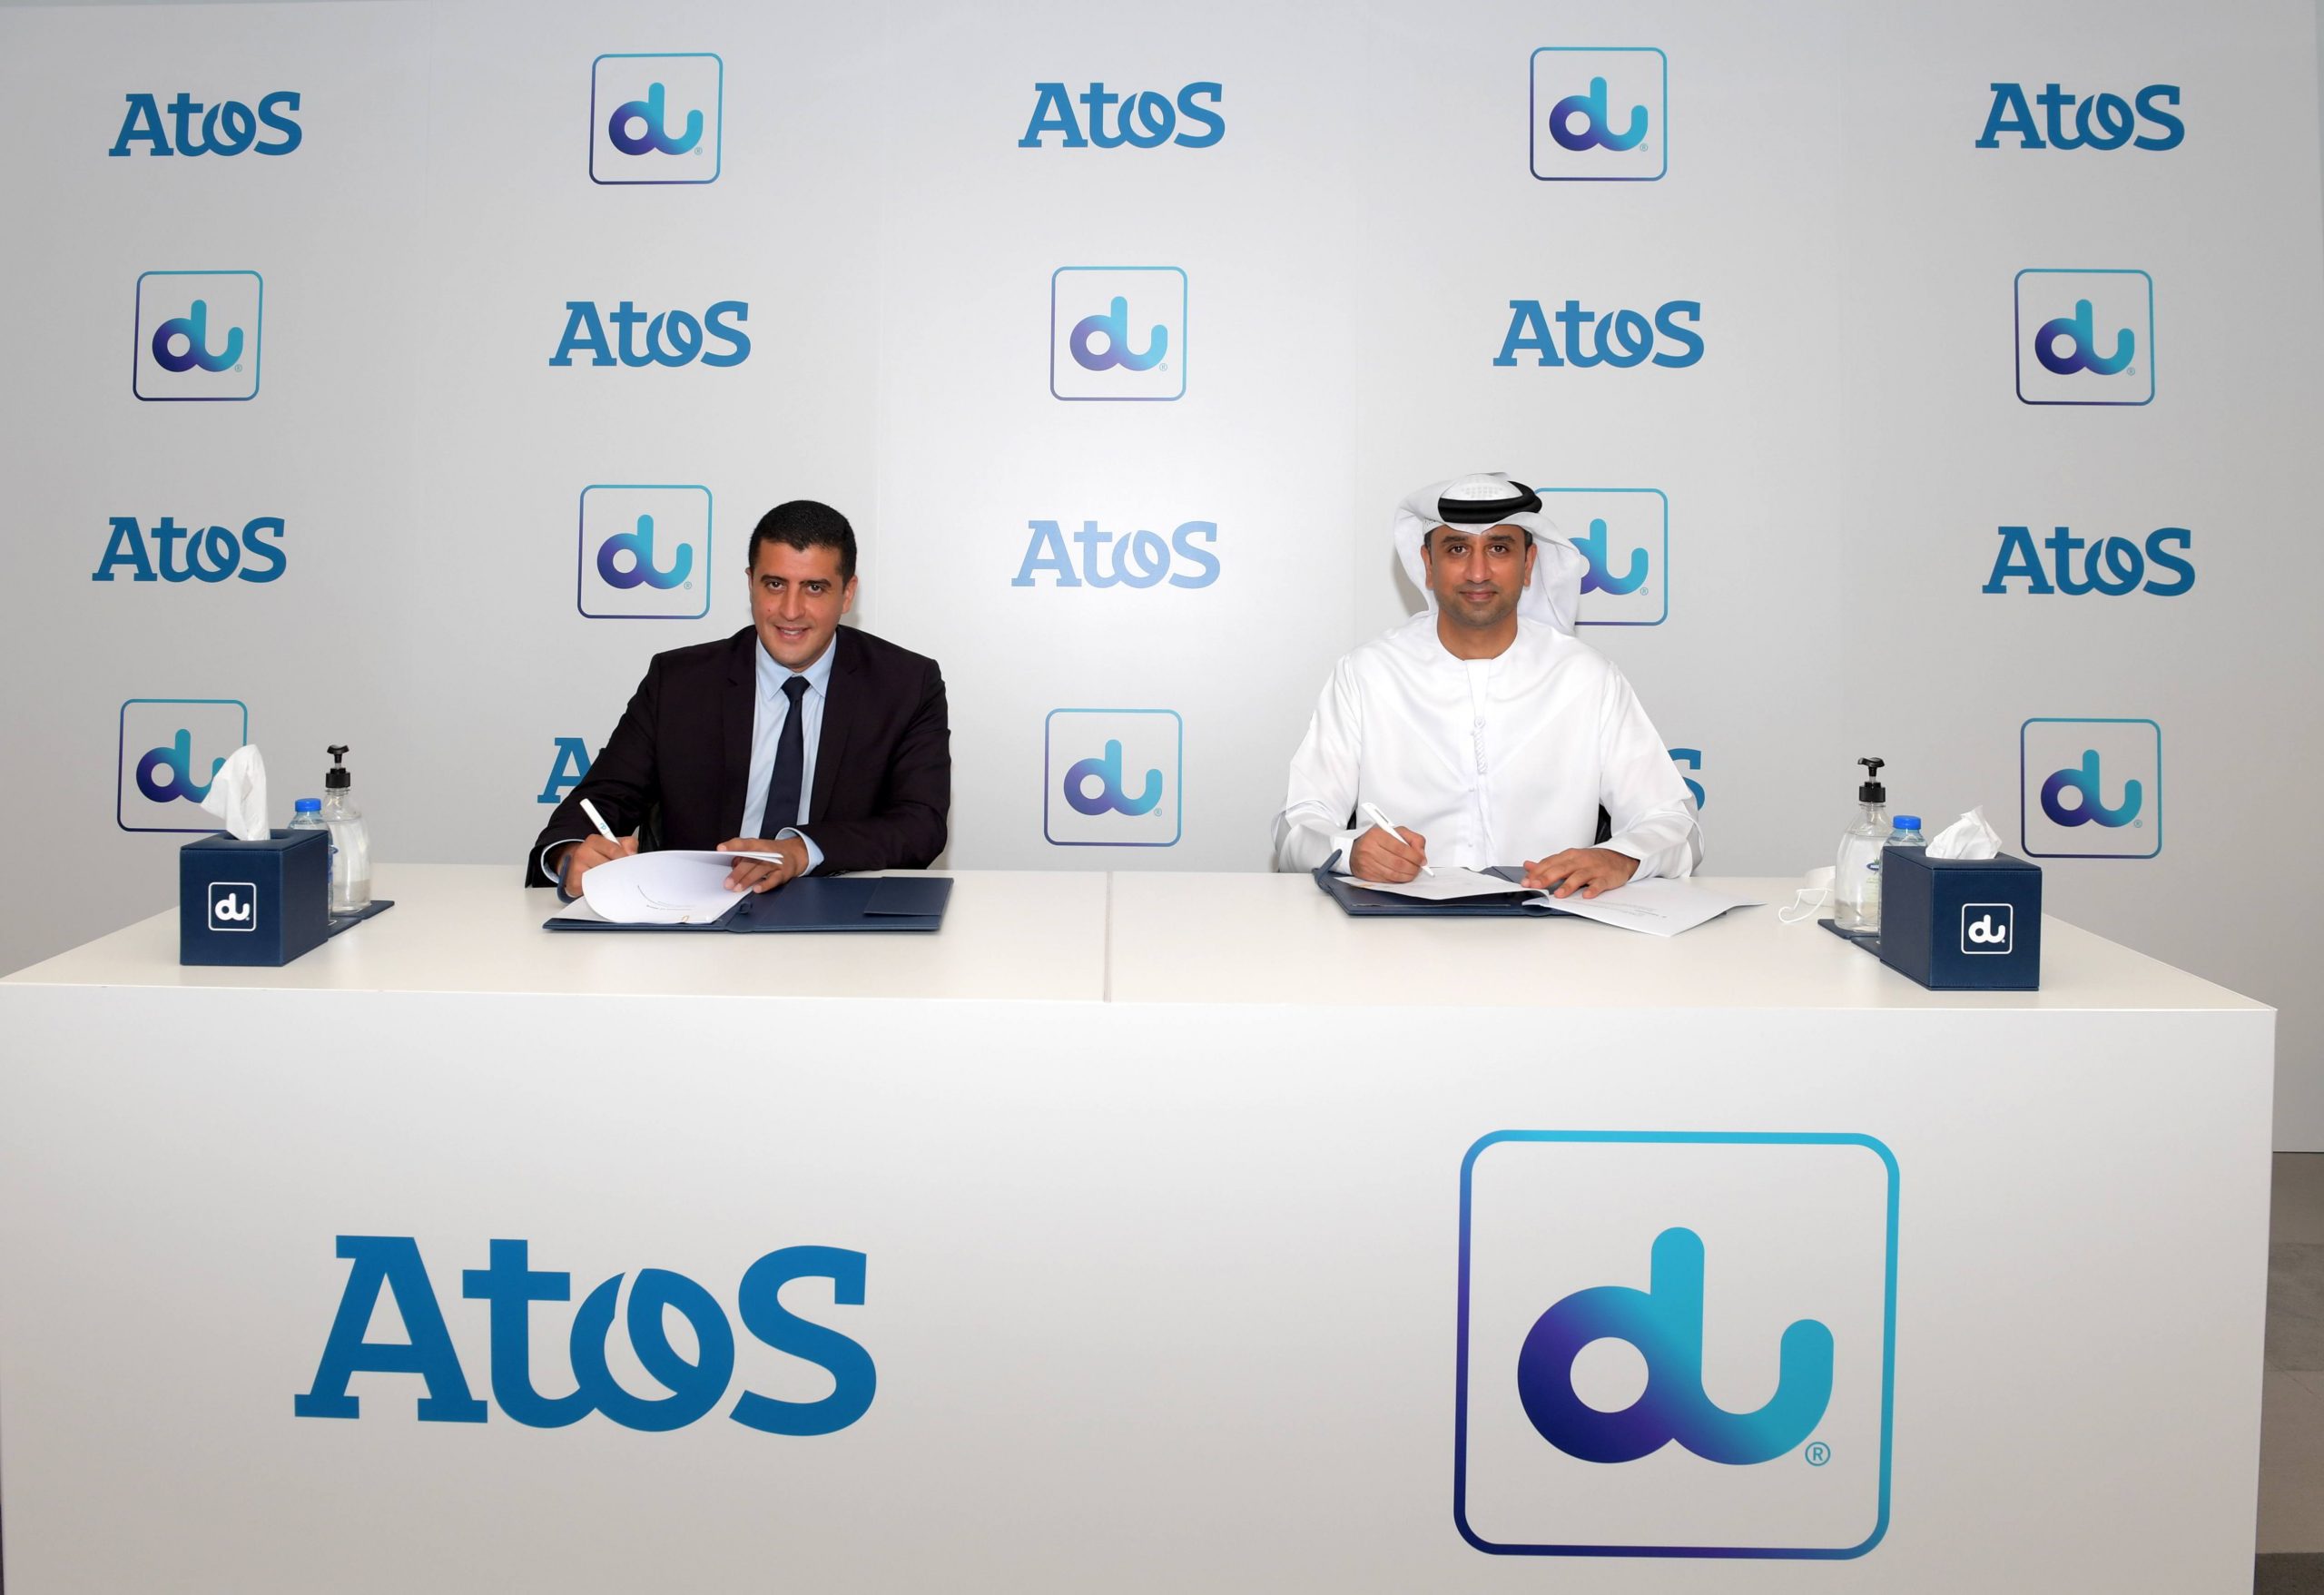 du renews its trust in Atos with 5-year contract to accelerate its IT modernization and digitalization